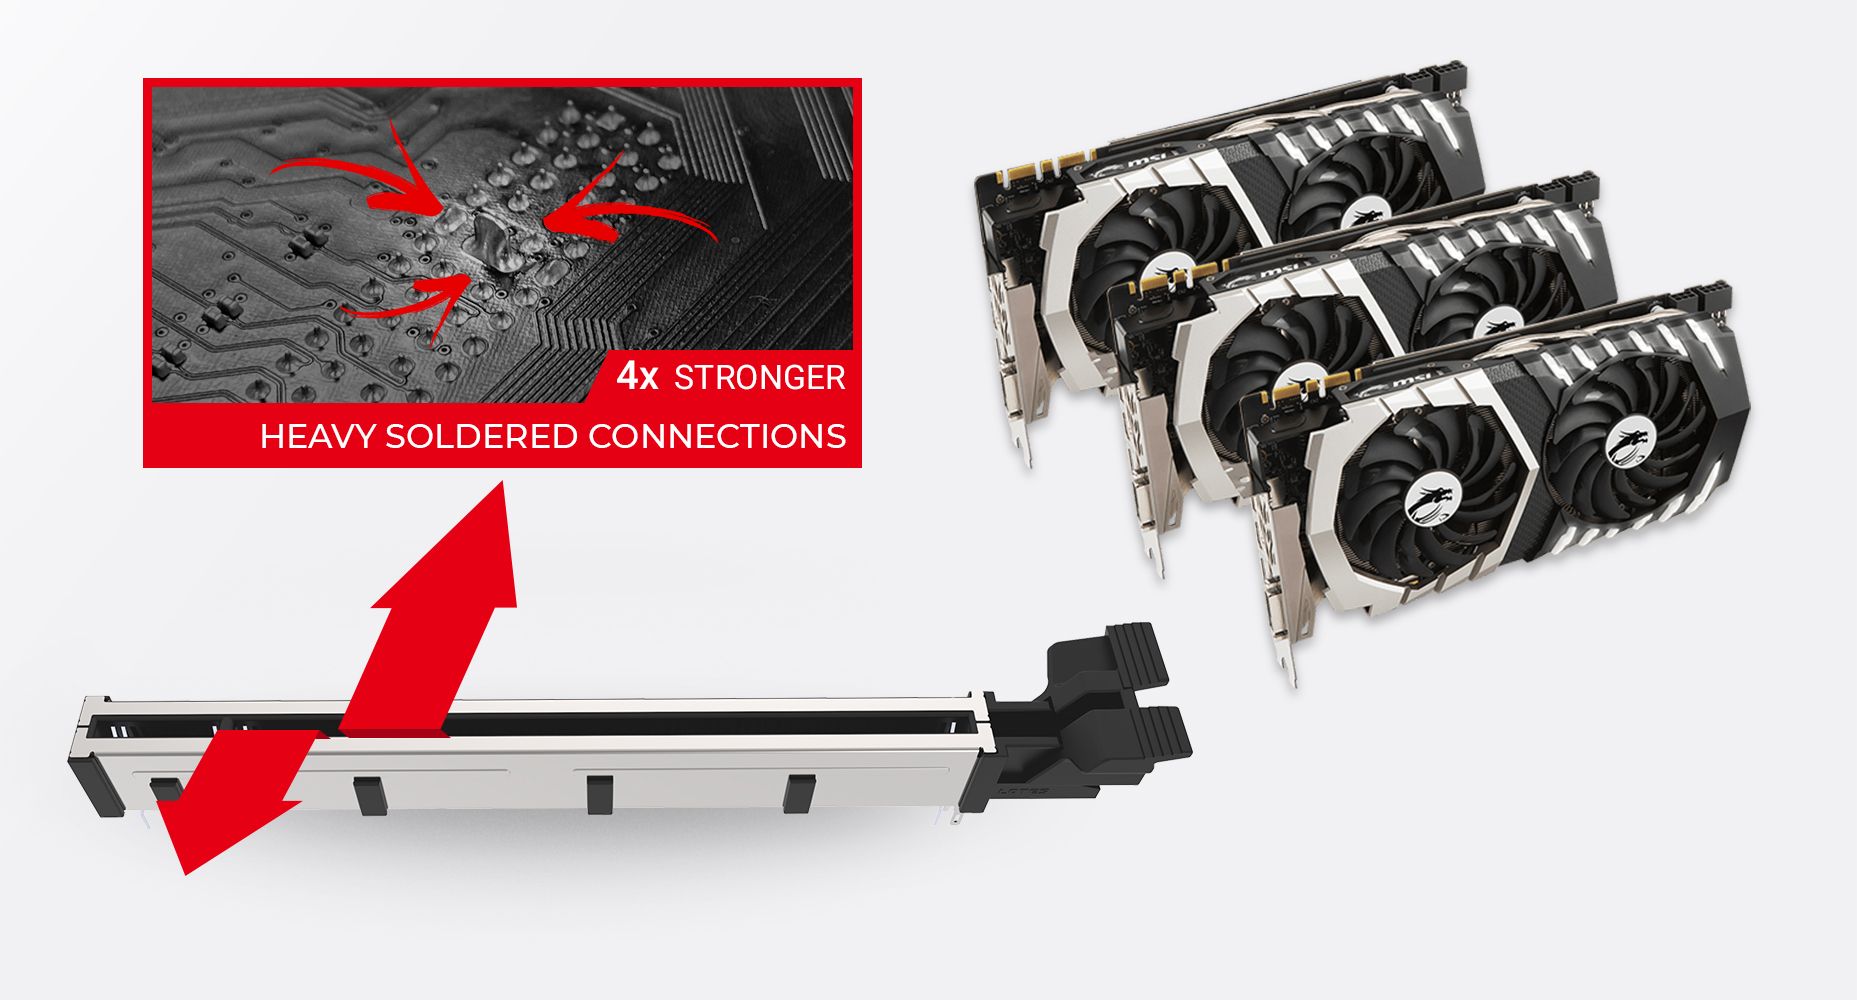 MSI MAG B560M MORTAR MULTIPLE GPU SUPPORTS AND STEEL ARMOR